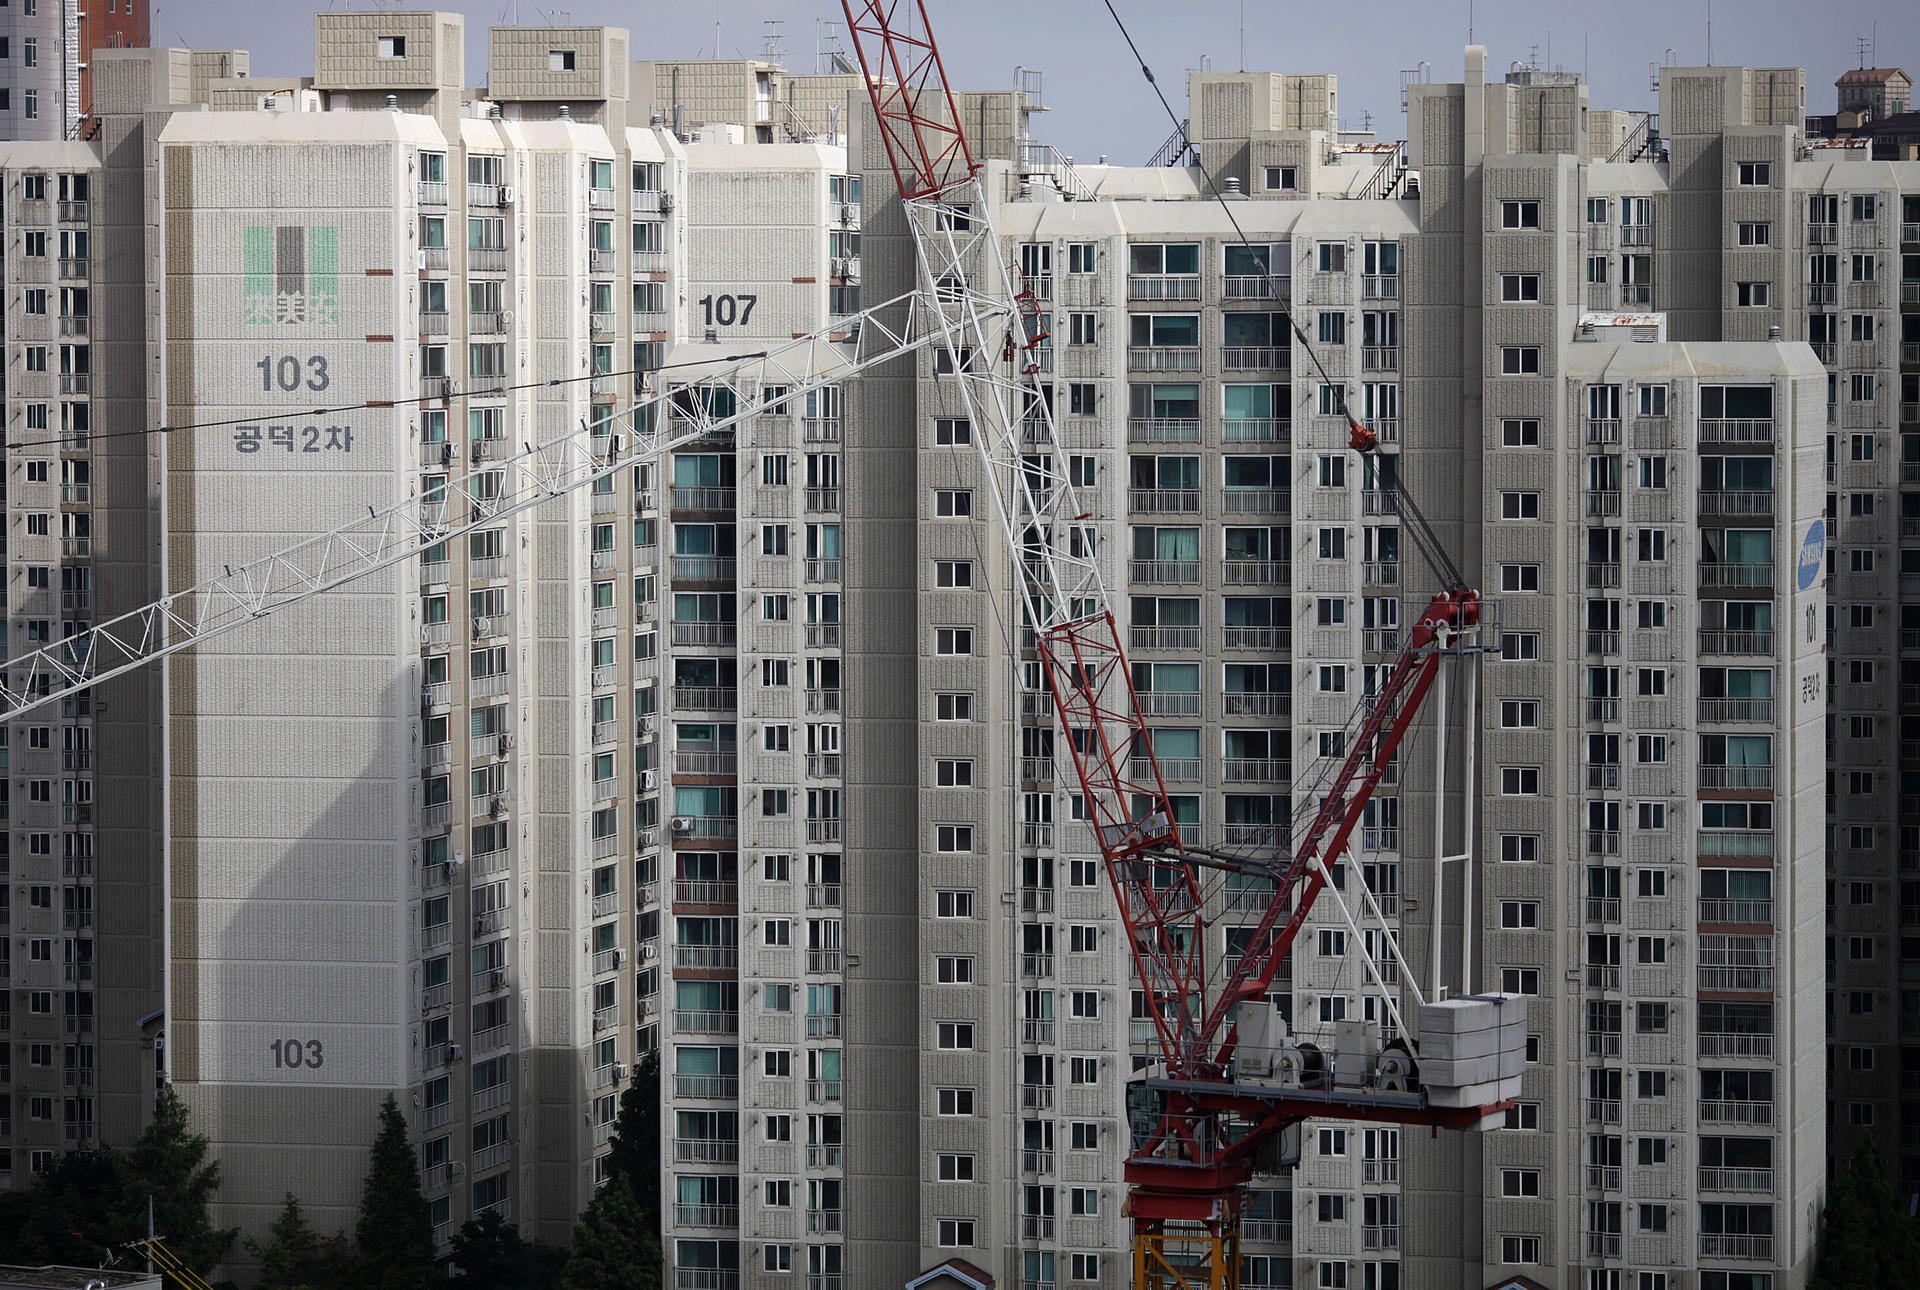 Home prices are starting to rise in Seoul after a four-year slump.